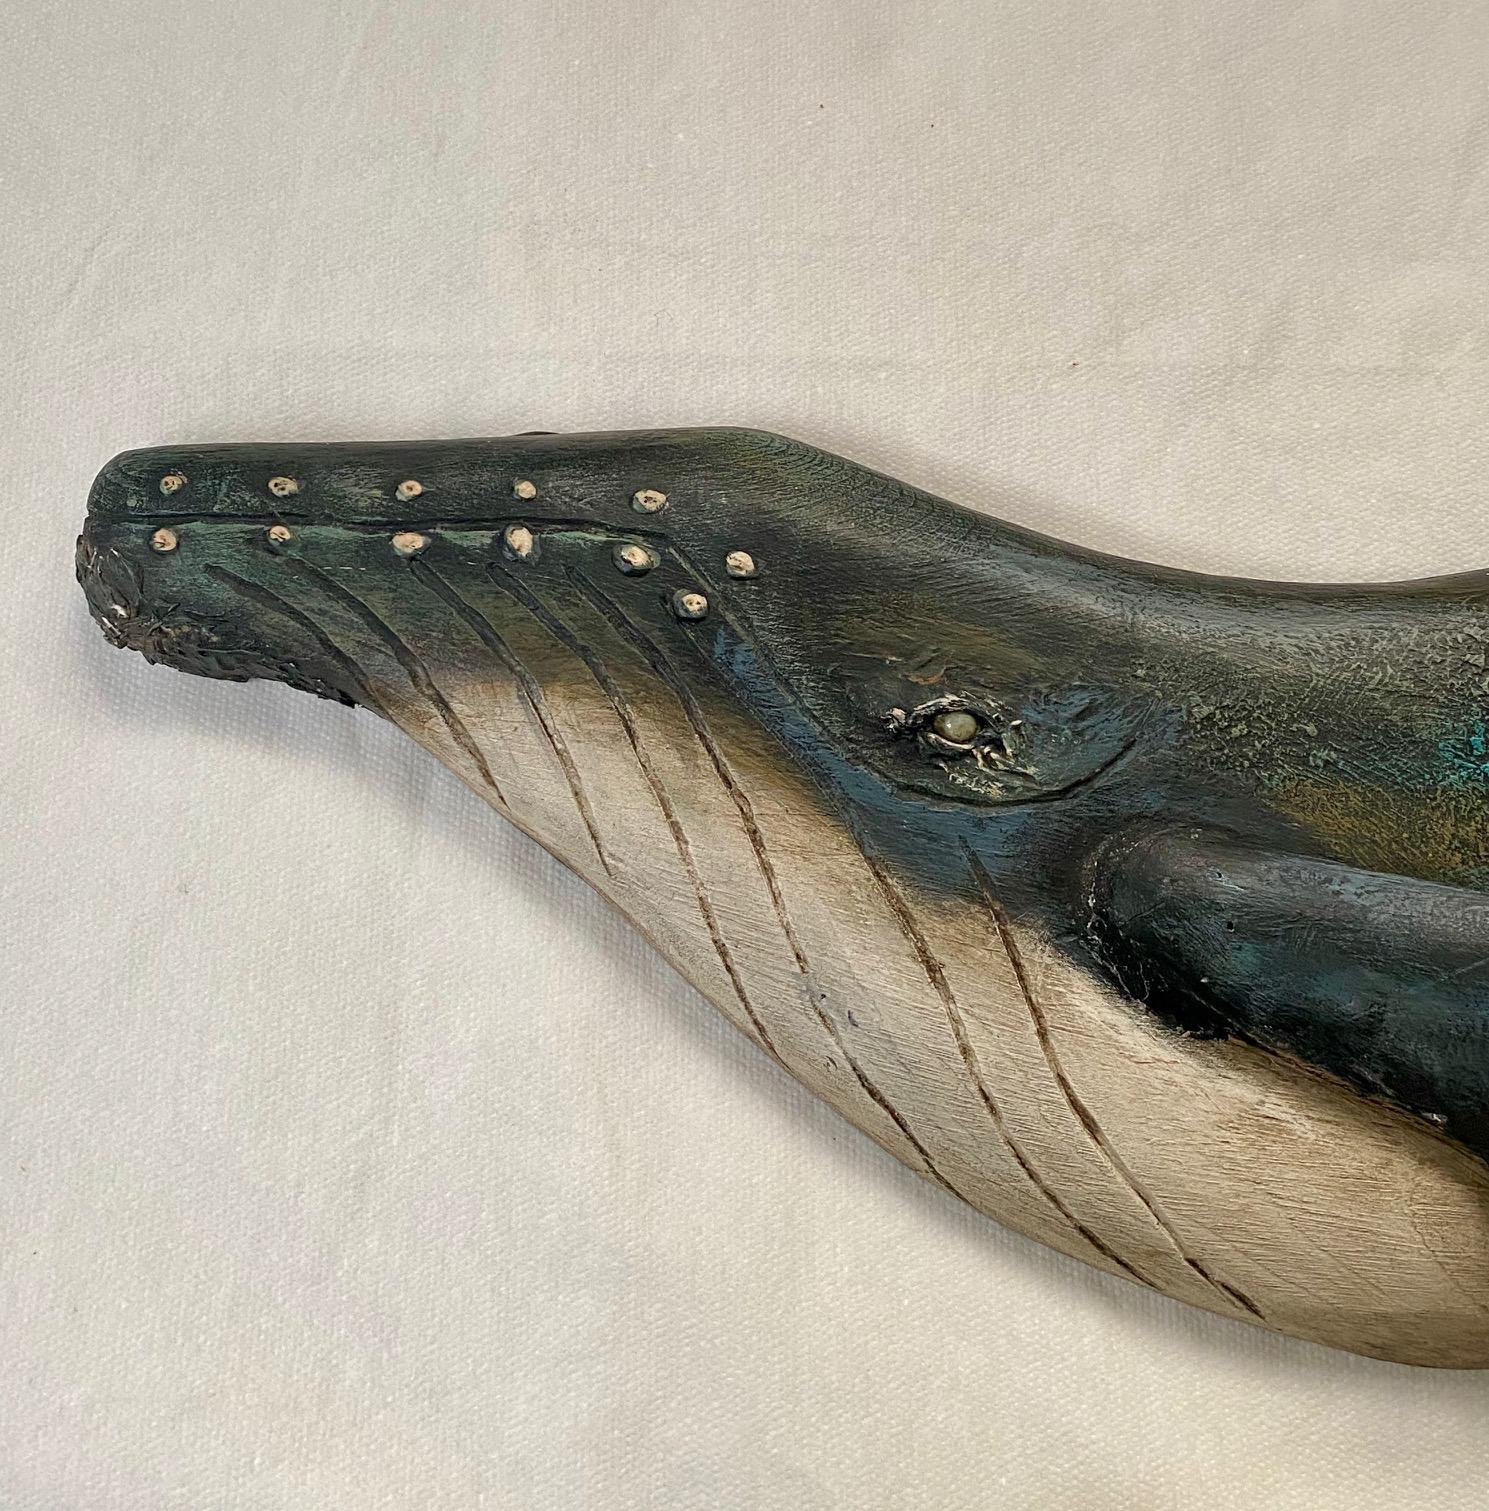 A Folk Art hand carved Humpback Whale Plaque, by the late renown Edgartown scrimshaw artist Thomas DeMont, 2010, a flat carved pine Humpback Whale with applied long pectoral fin, dramatically carved tail flukes with their wavy trailing edge, carved